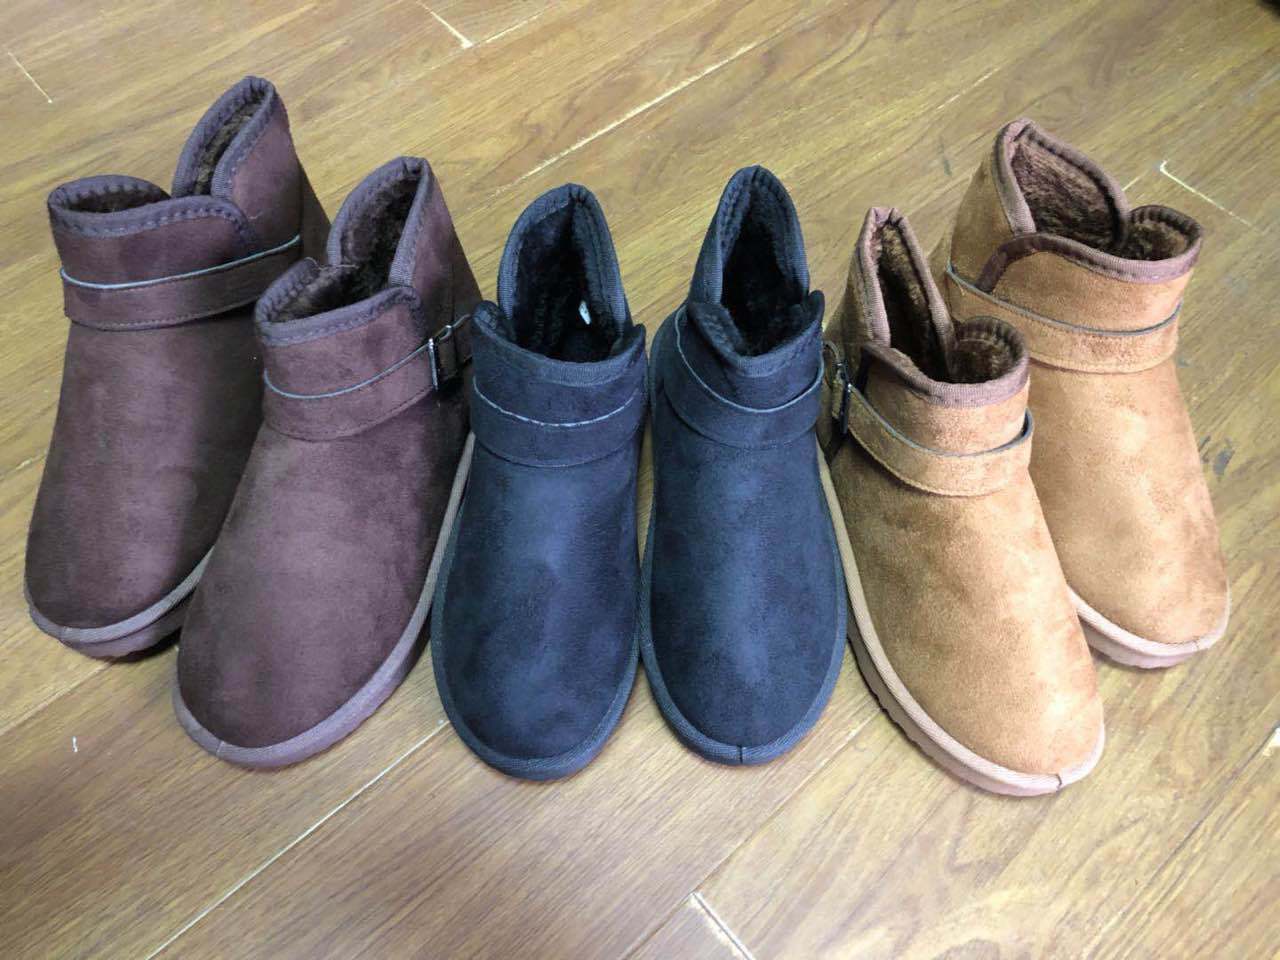 High/Top Quality for Snow Boots, Winter Boots, Sheepskin Ladies Boots